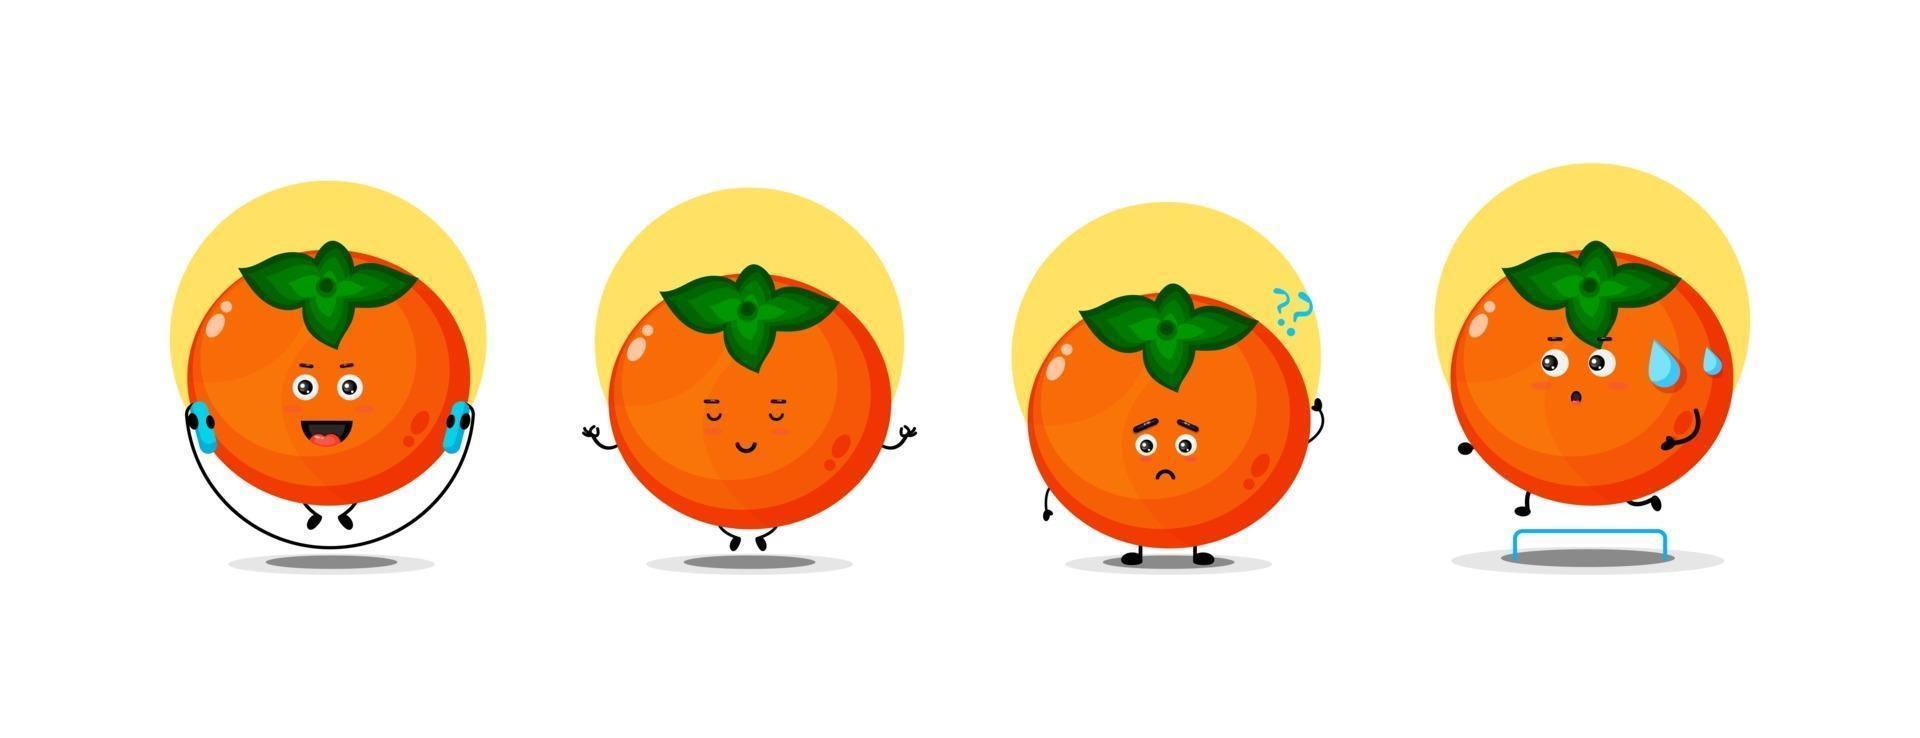 Cute persimmon character collection vector